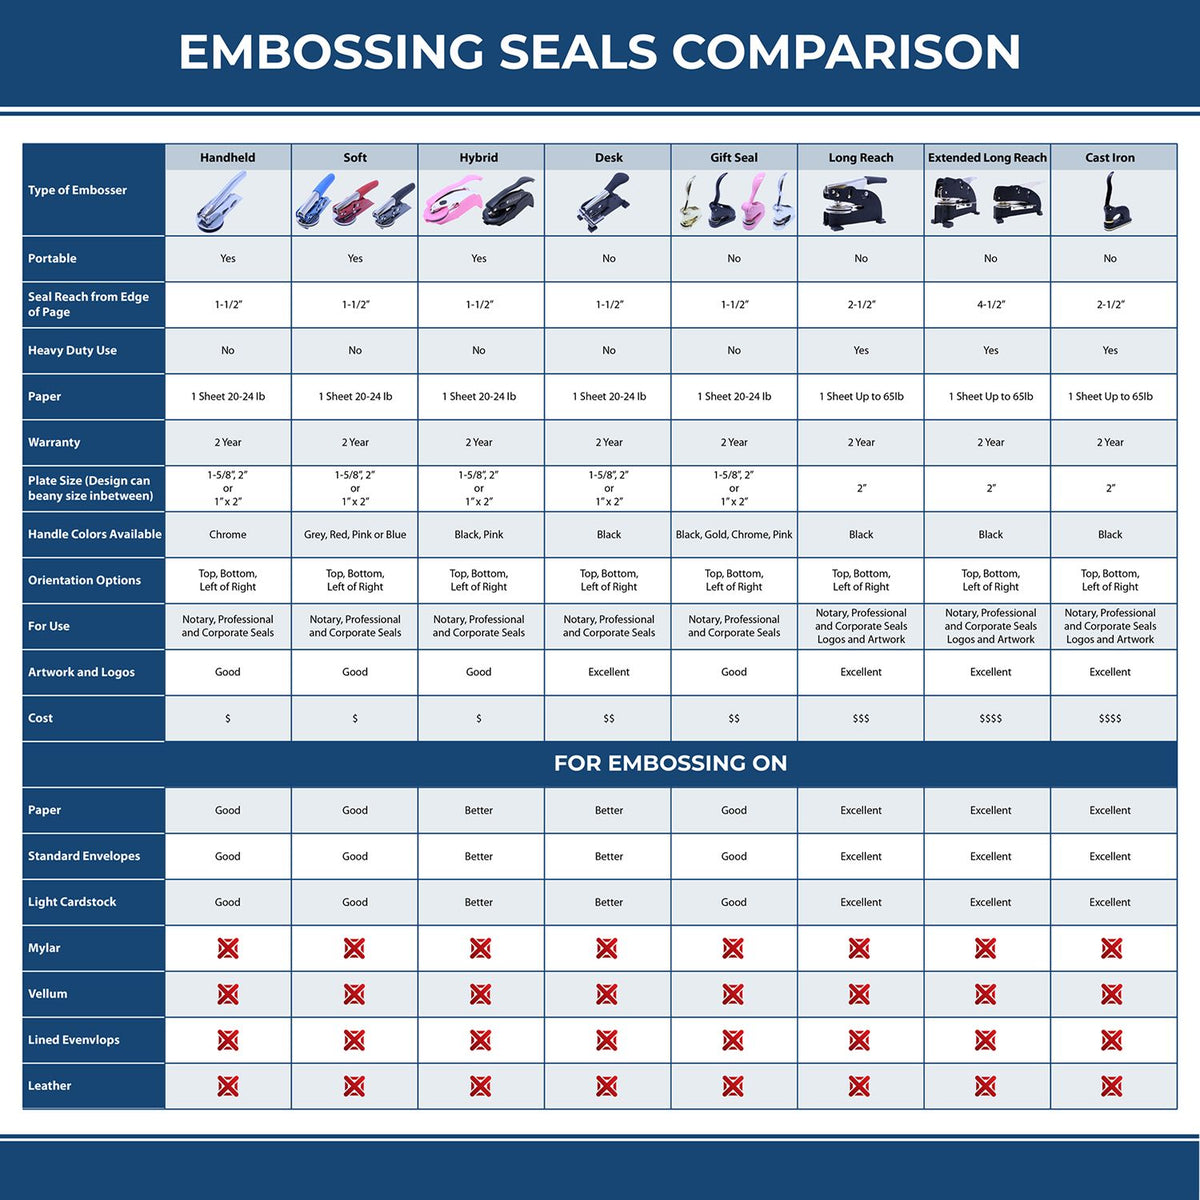 A comparison chart for the different types of mount models available for the State of Connecticut Extended Long Reach Geologist Seal